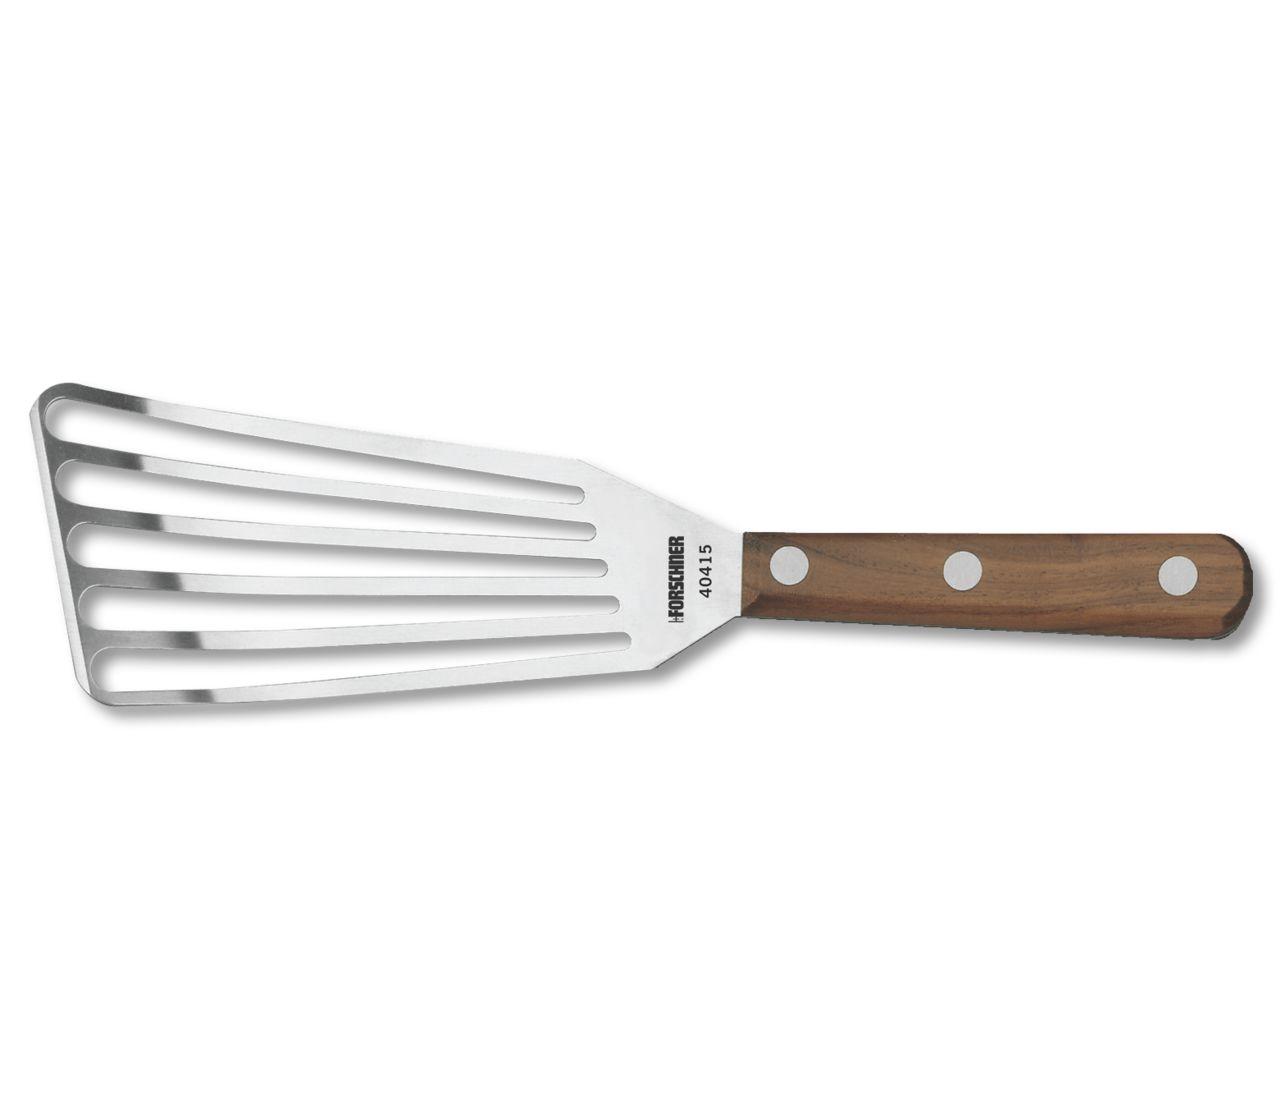 The 6 Best Fish Spatulas in 2023, Tested & Reviewed